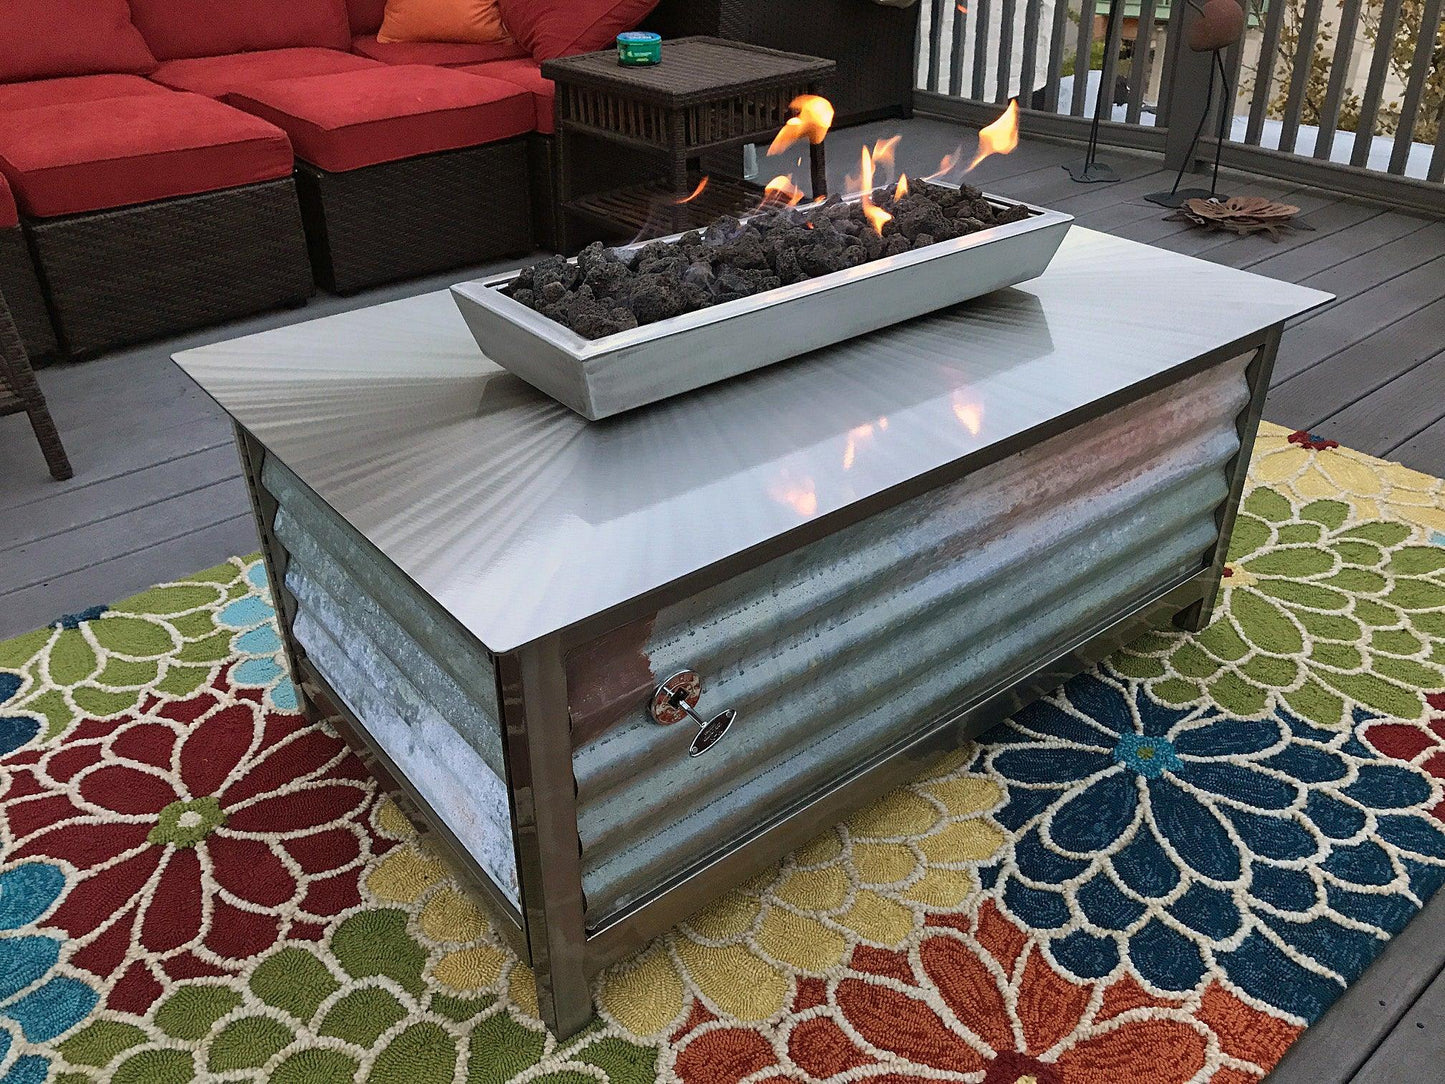 IMPACT Fire Table Installation Pictures - Impact Imports